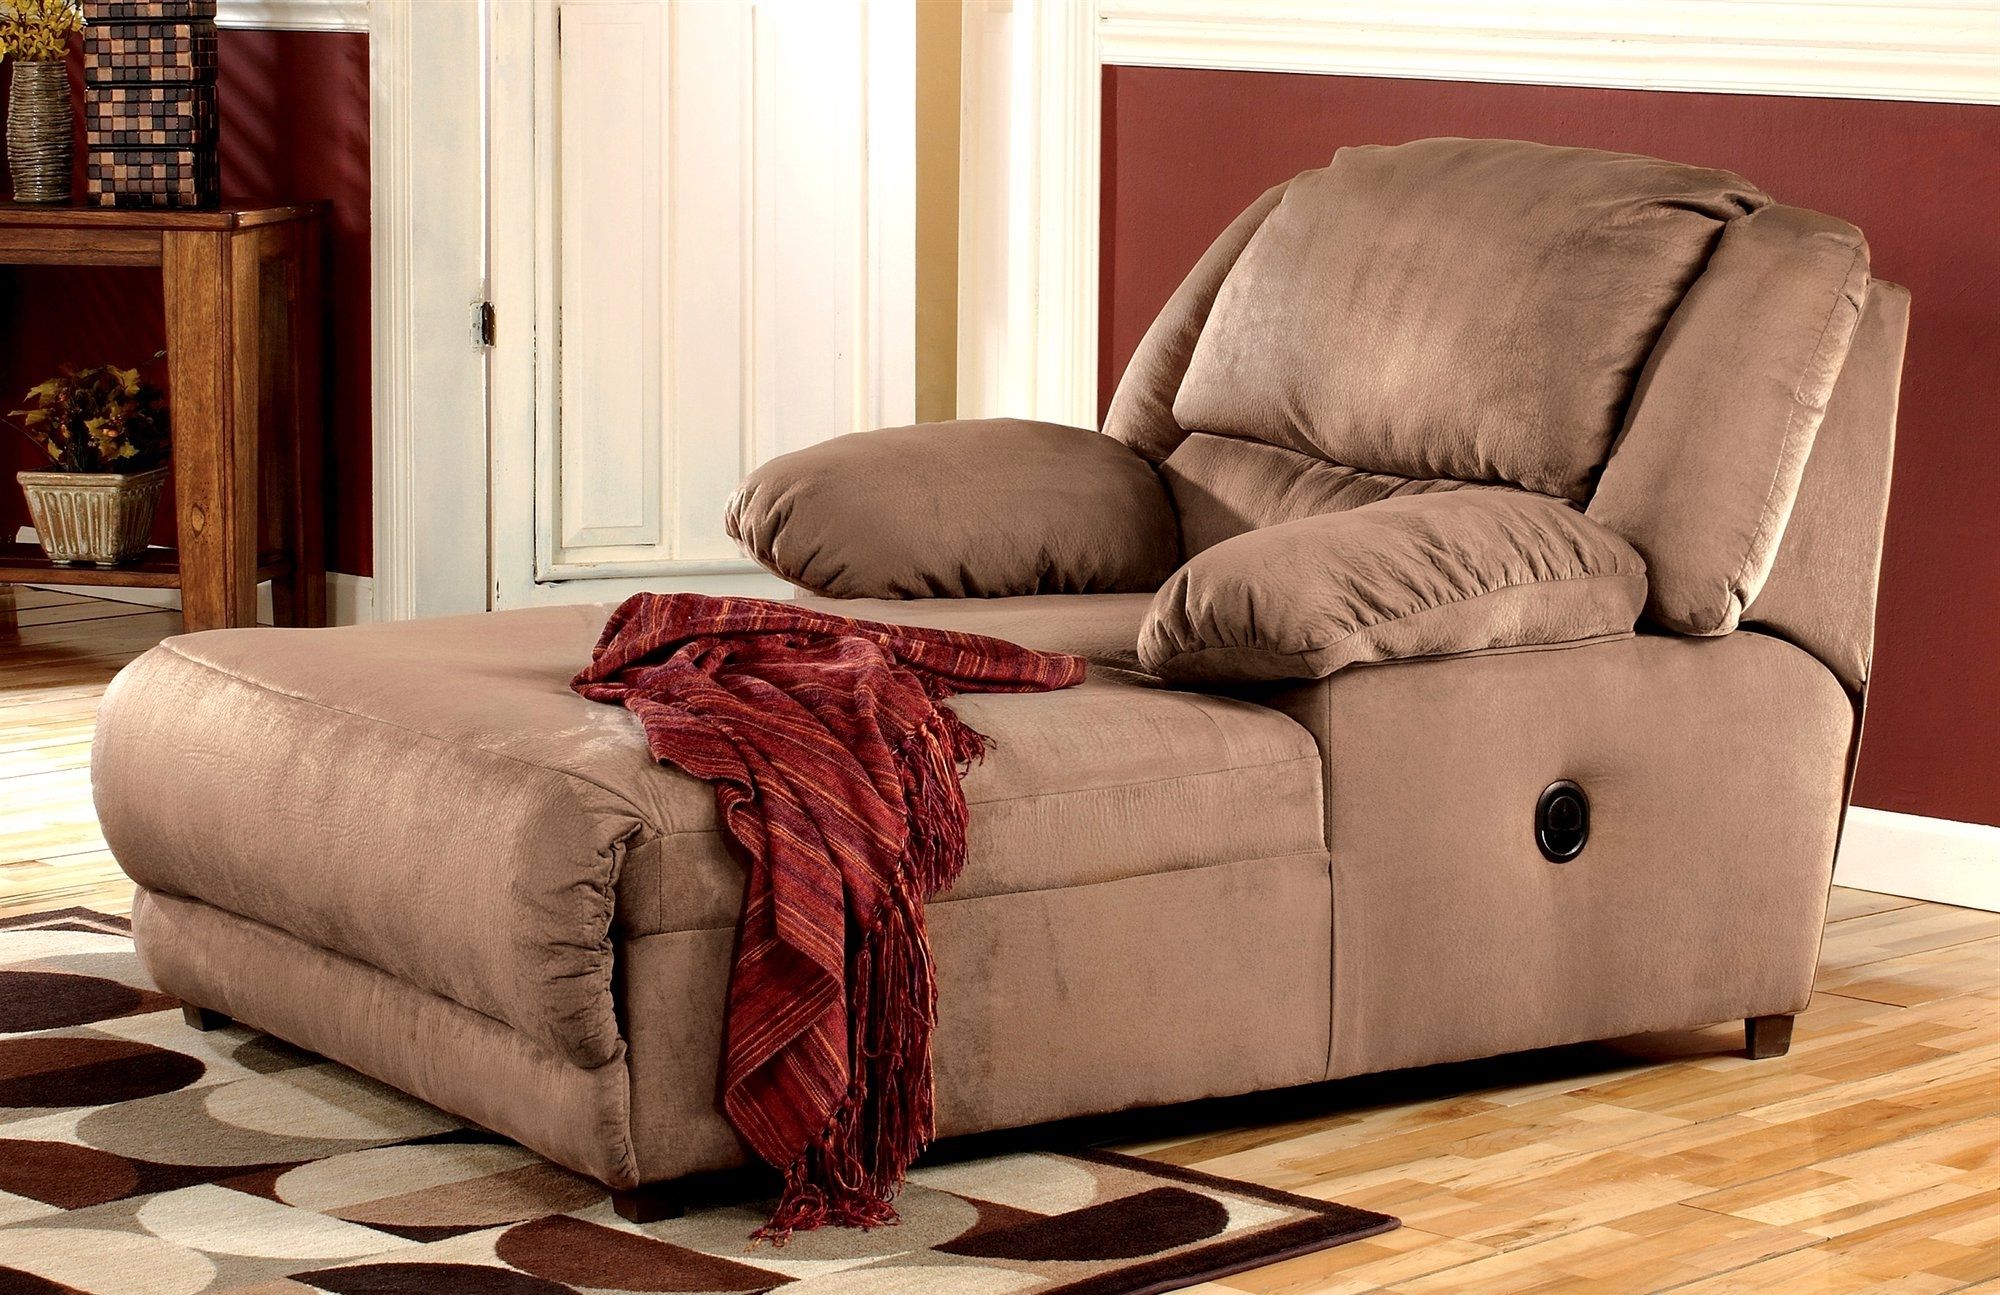 Chaise Lounge Chairs For Living Room